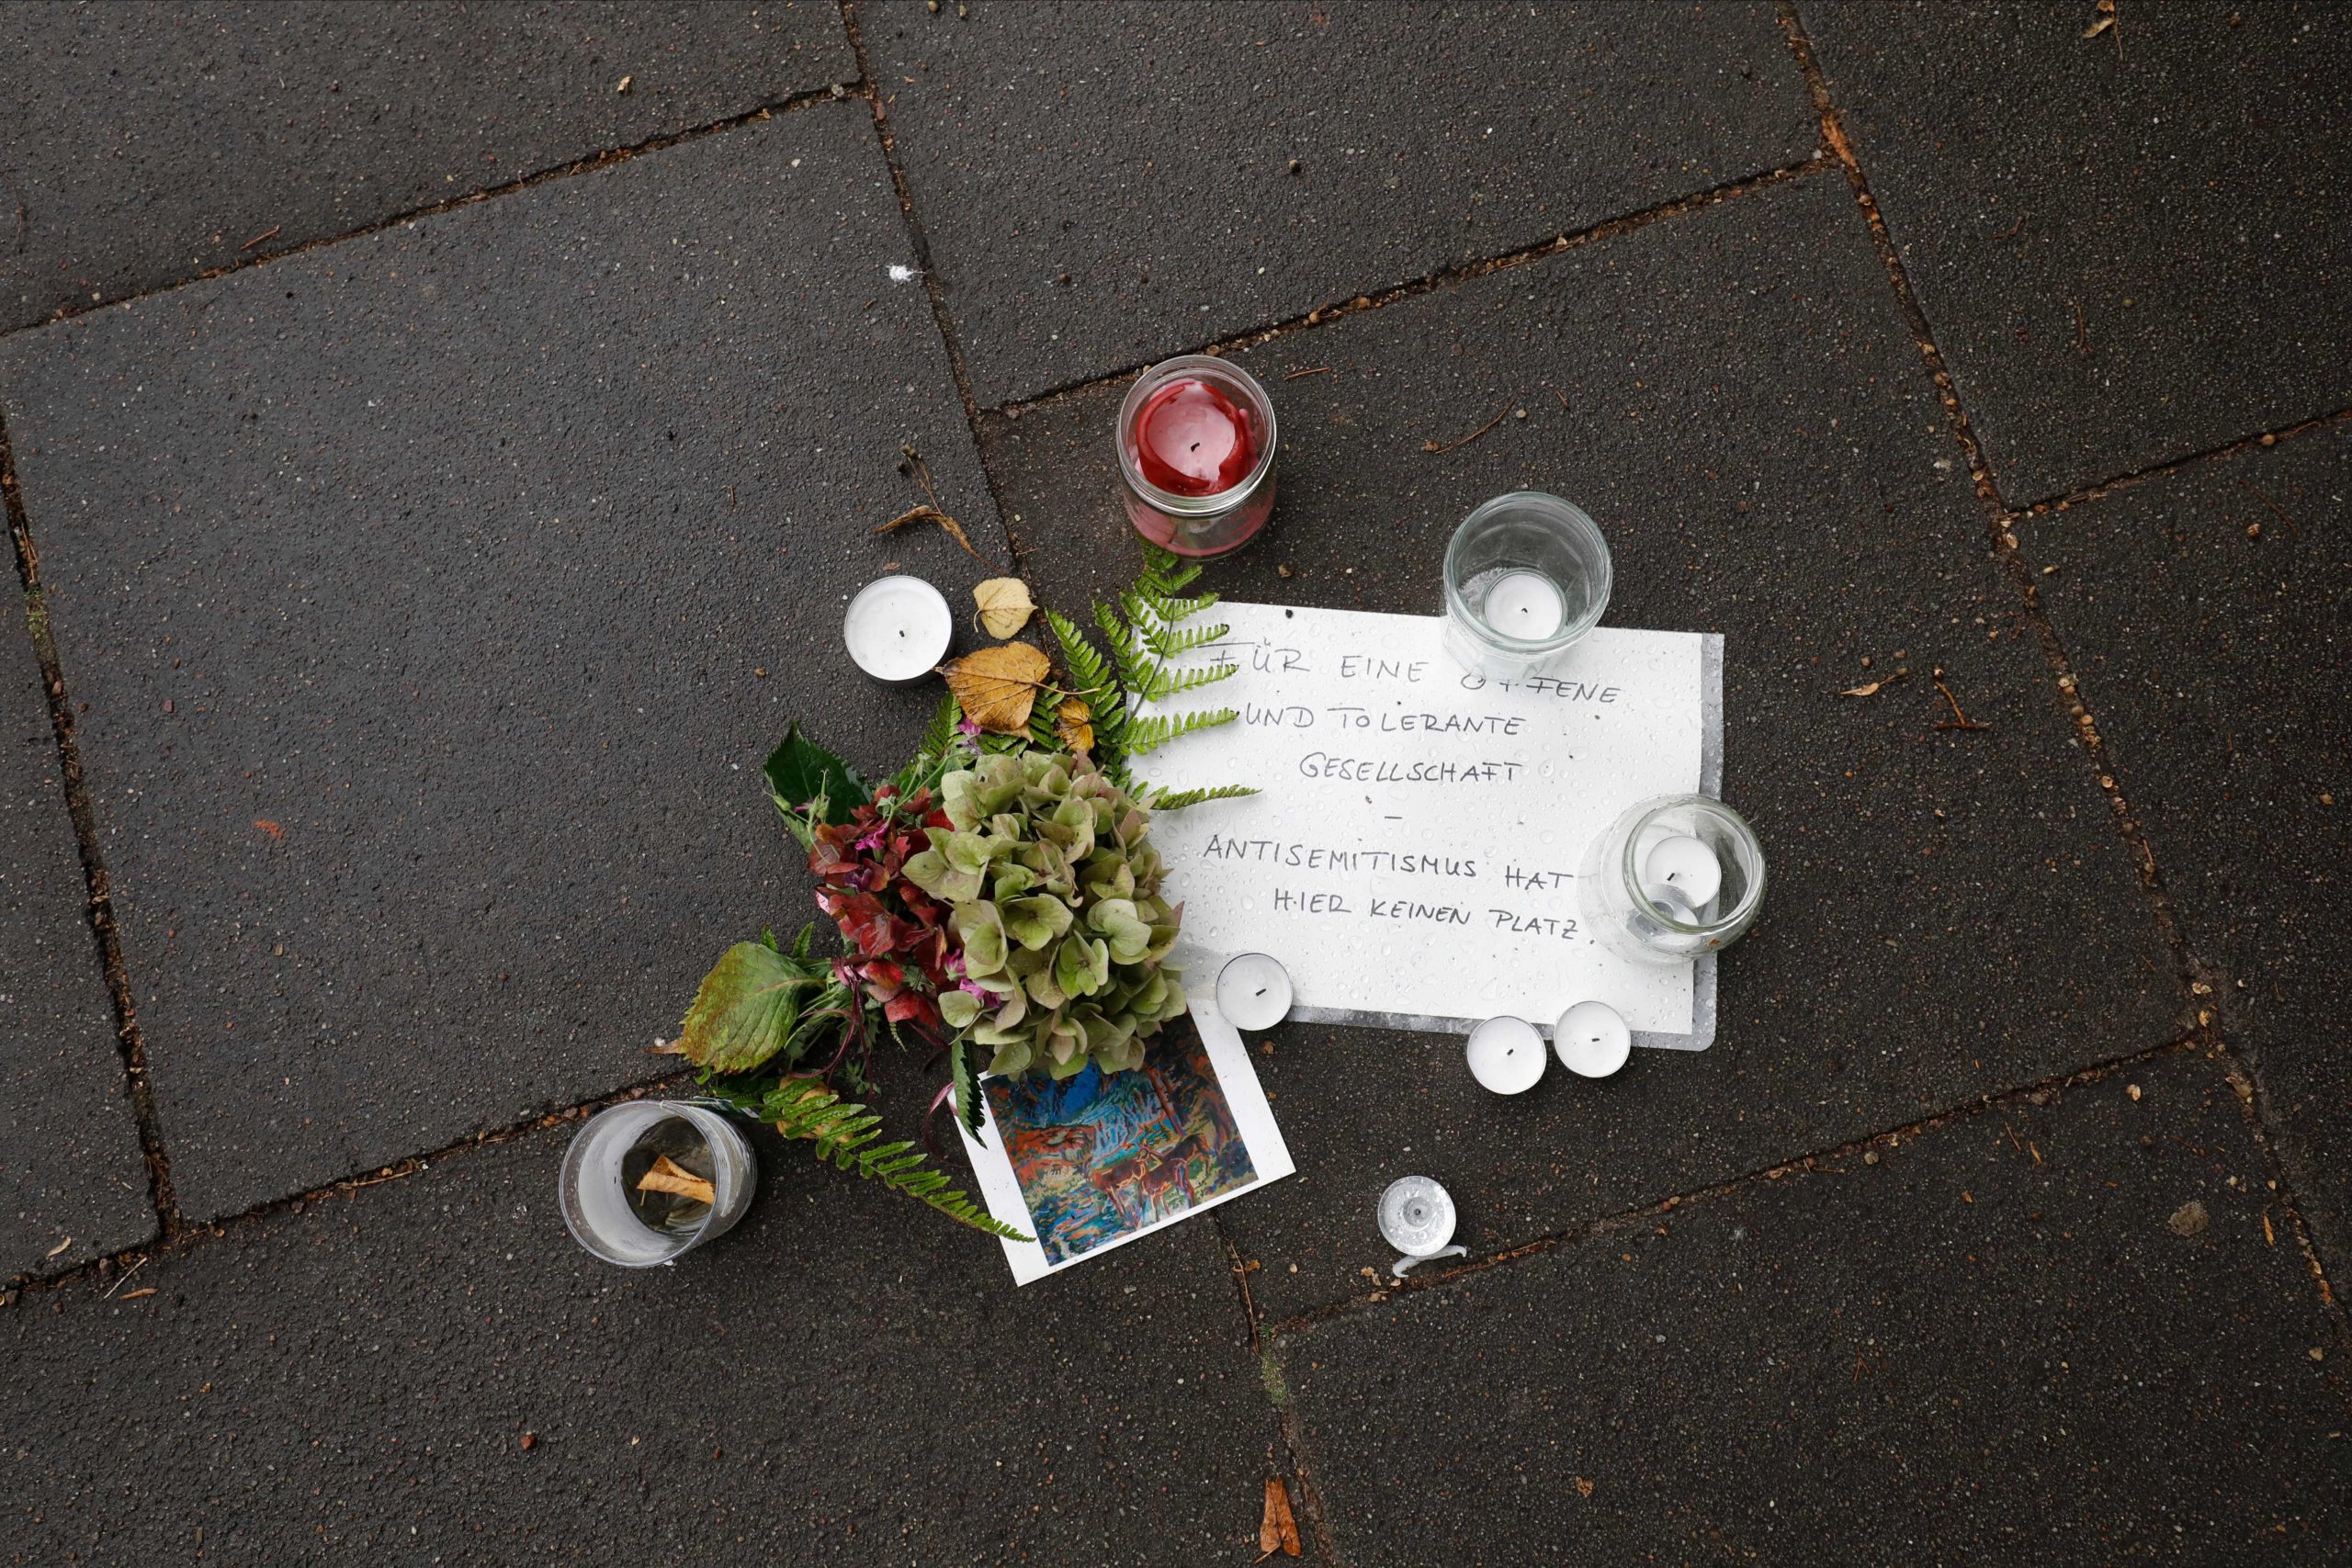 Flowers, candles and a message reading "For an open and tolerant society - Antisemitism has no place here" are pictured in front of the Synagoge 'Hohe Weide' in Hamburg, northern Germeny, on Oktober 5, 2020, one day after an attack on a Jewish student. - A Jewish student was badly injured on Sunday, October 4, 2020, after a man attacked him with a shovel outside the synagogue. Police assigned to protect the synagogue arrested a 29-year-old man who was wearing a uniform resembling that of the Germany army. (Photo by MORRIS MAC MATZEN / AFP) (Photo by MORRIS MAC MATZEN/AFP via Getty Images)